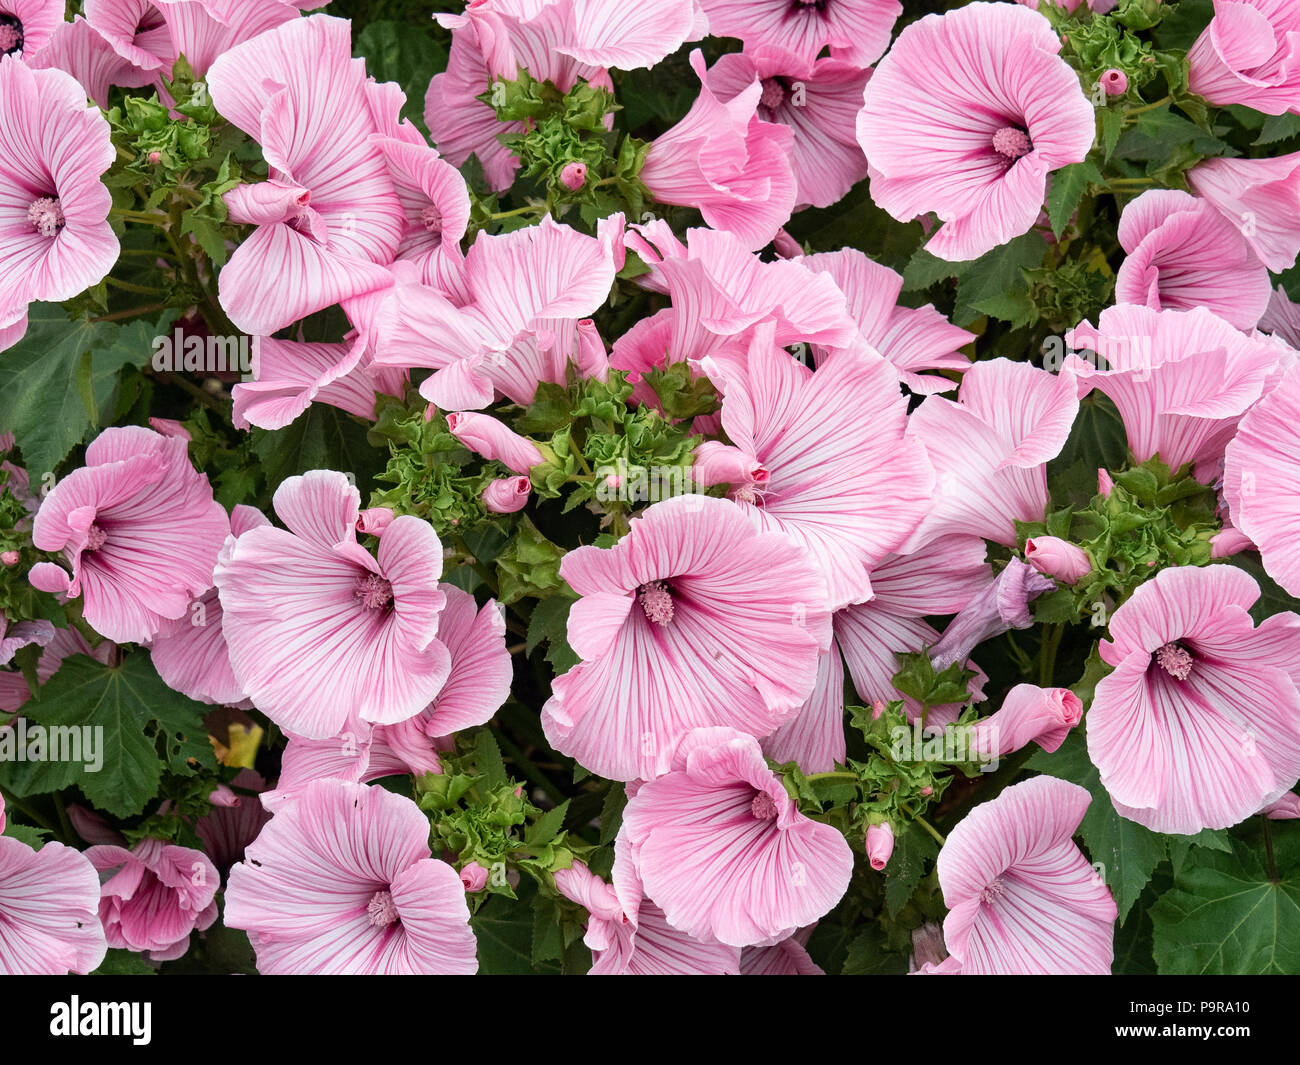 A group of the large pink flowers of Lavatera Silver Cup Stock Photo